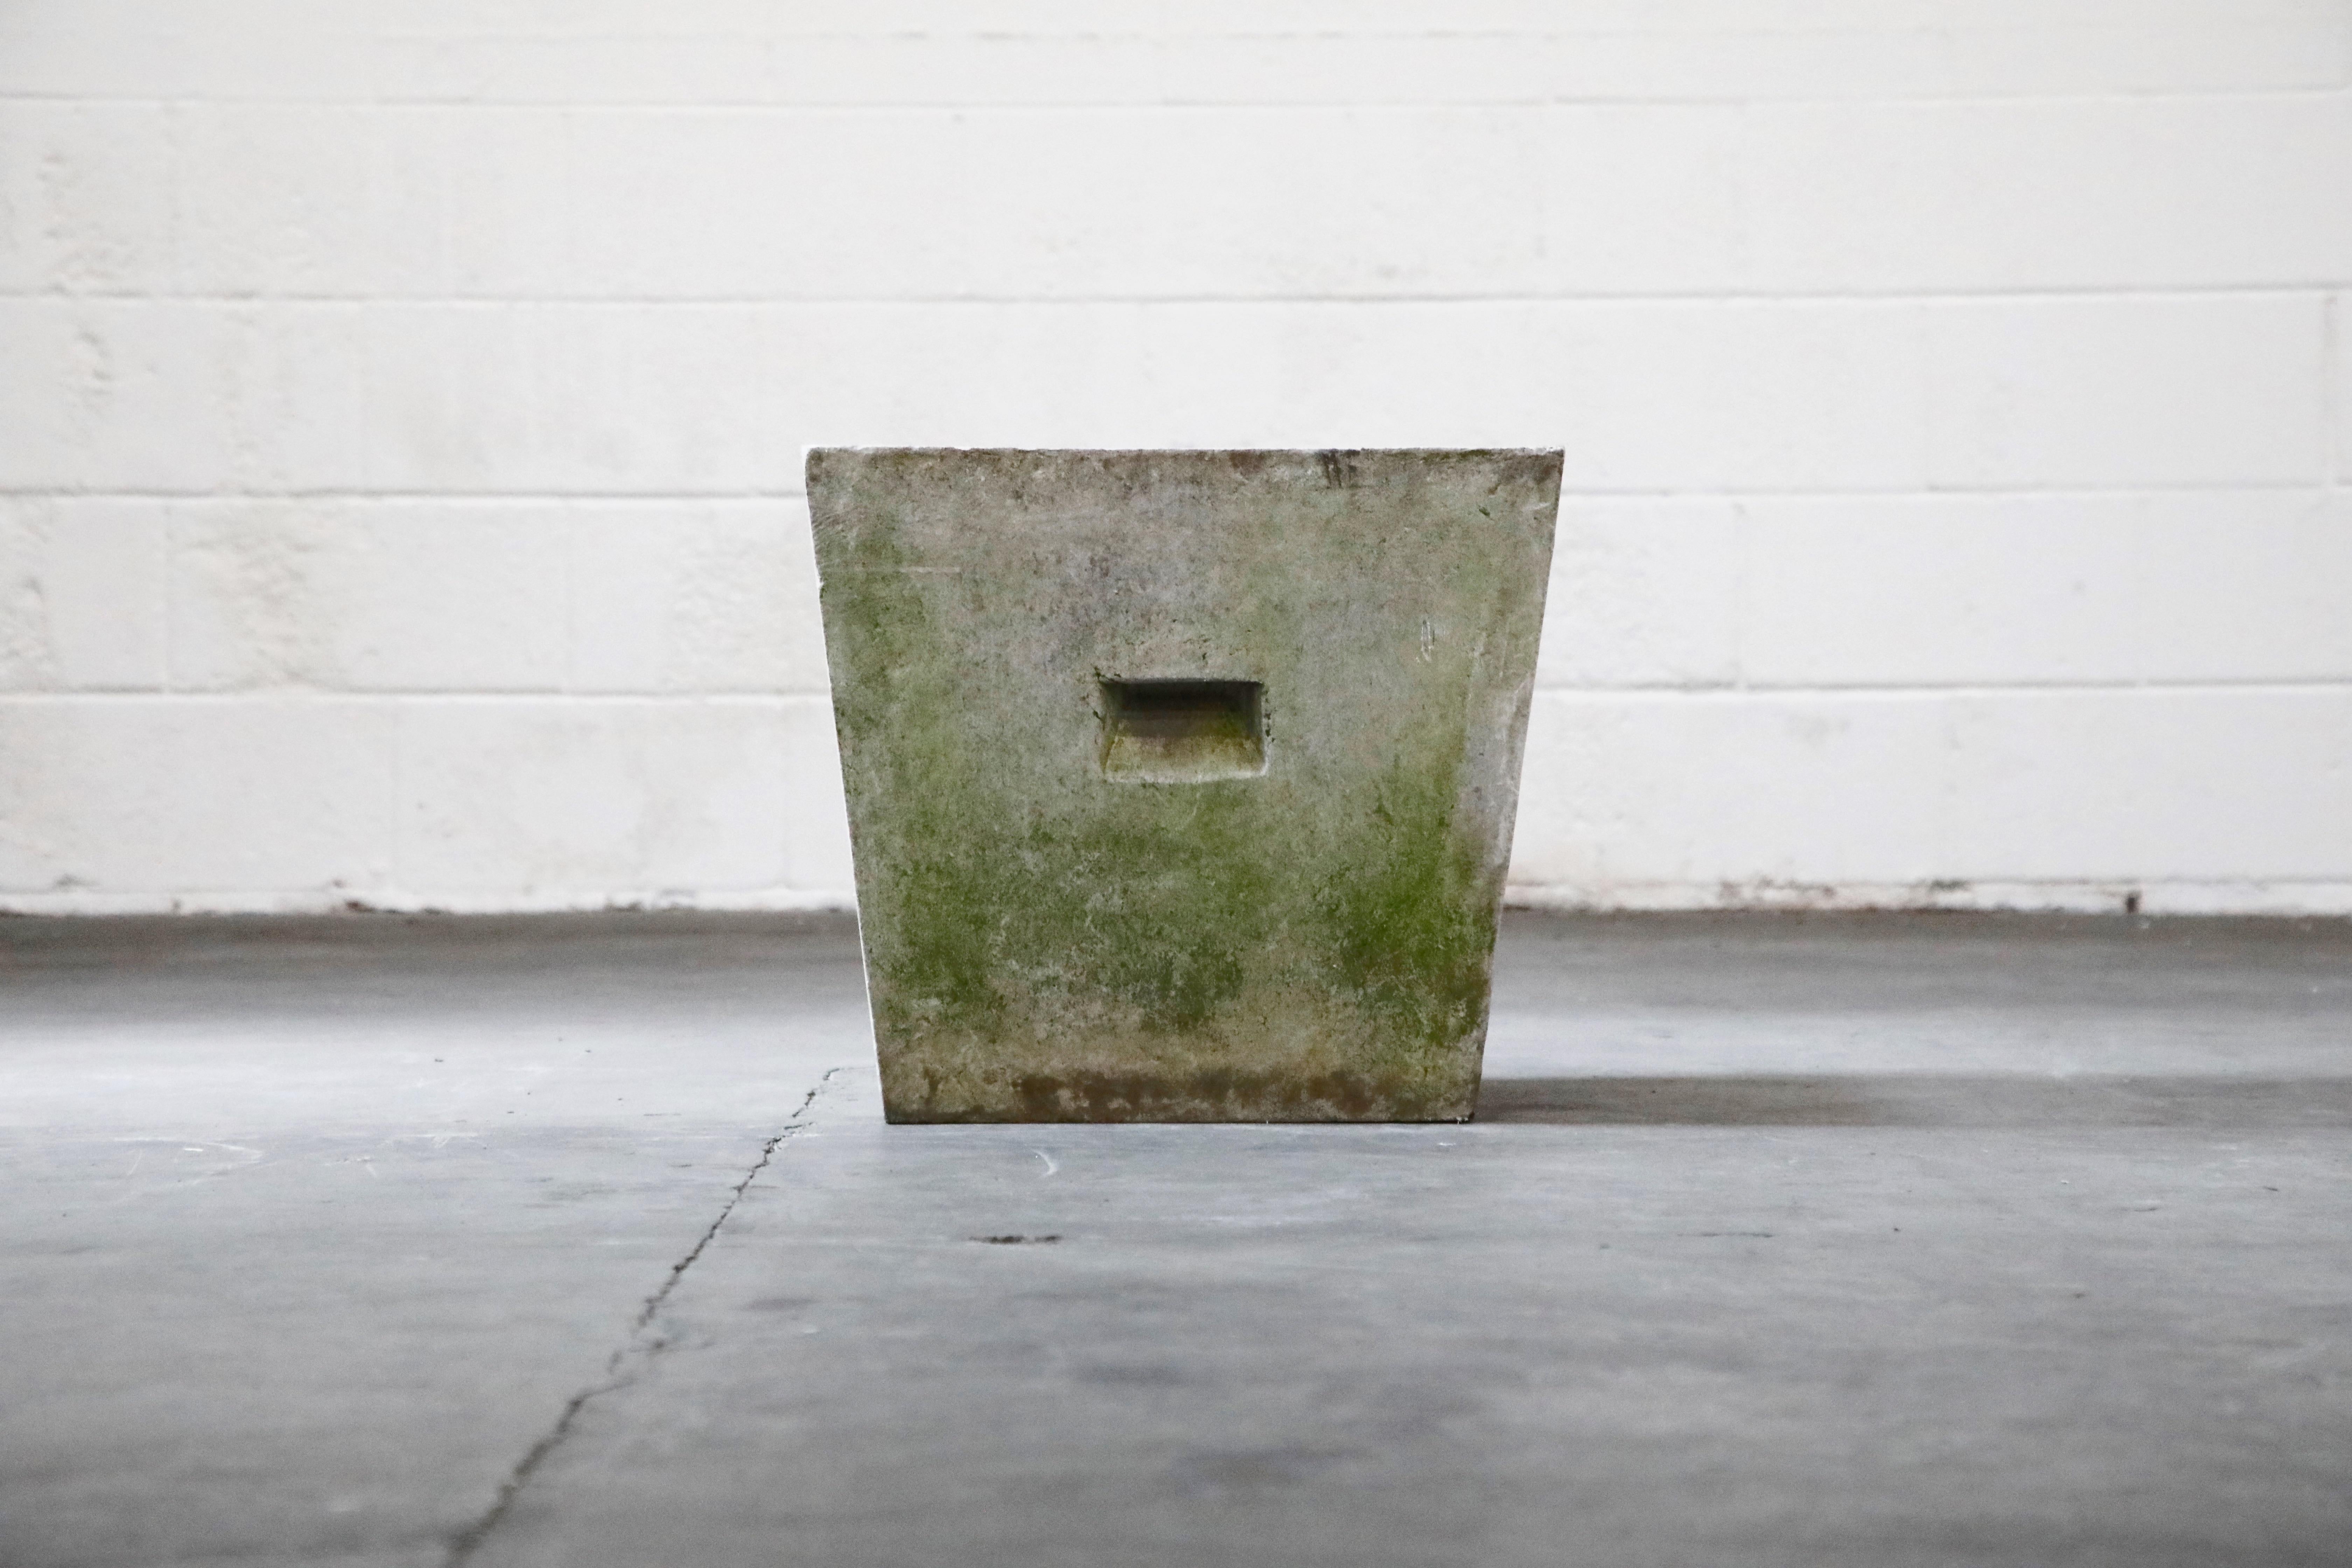 This designer on-trend architectural trapezoid concrete planter with handles was designed by Swiss architect Willy Guhl for Eternit, circa 1968 Switzerland. This special Trapezoid shaped concrete handle planter has a patinated natural exterior